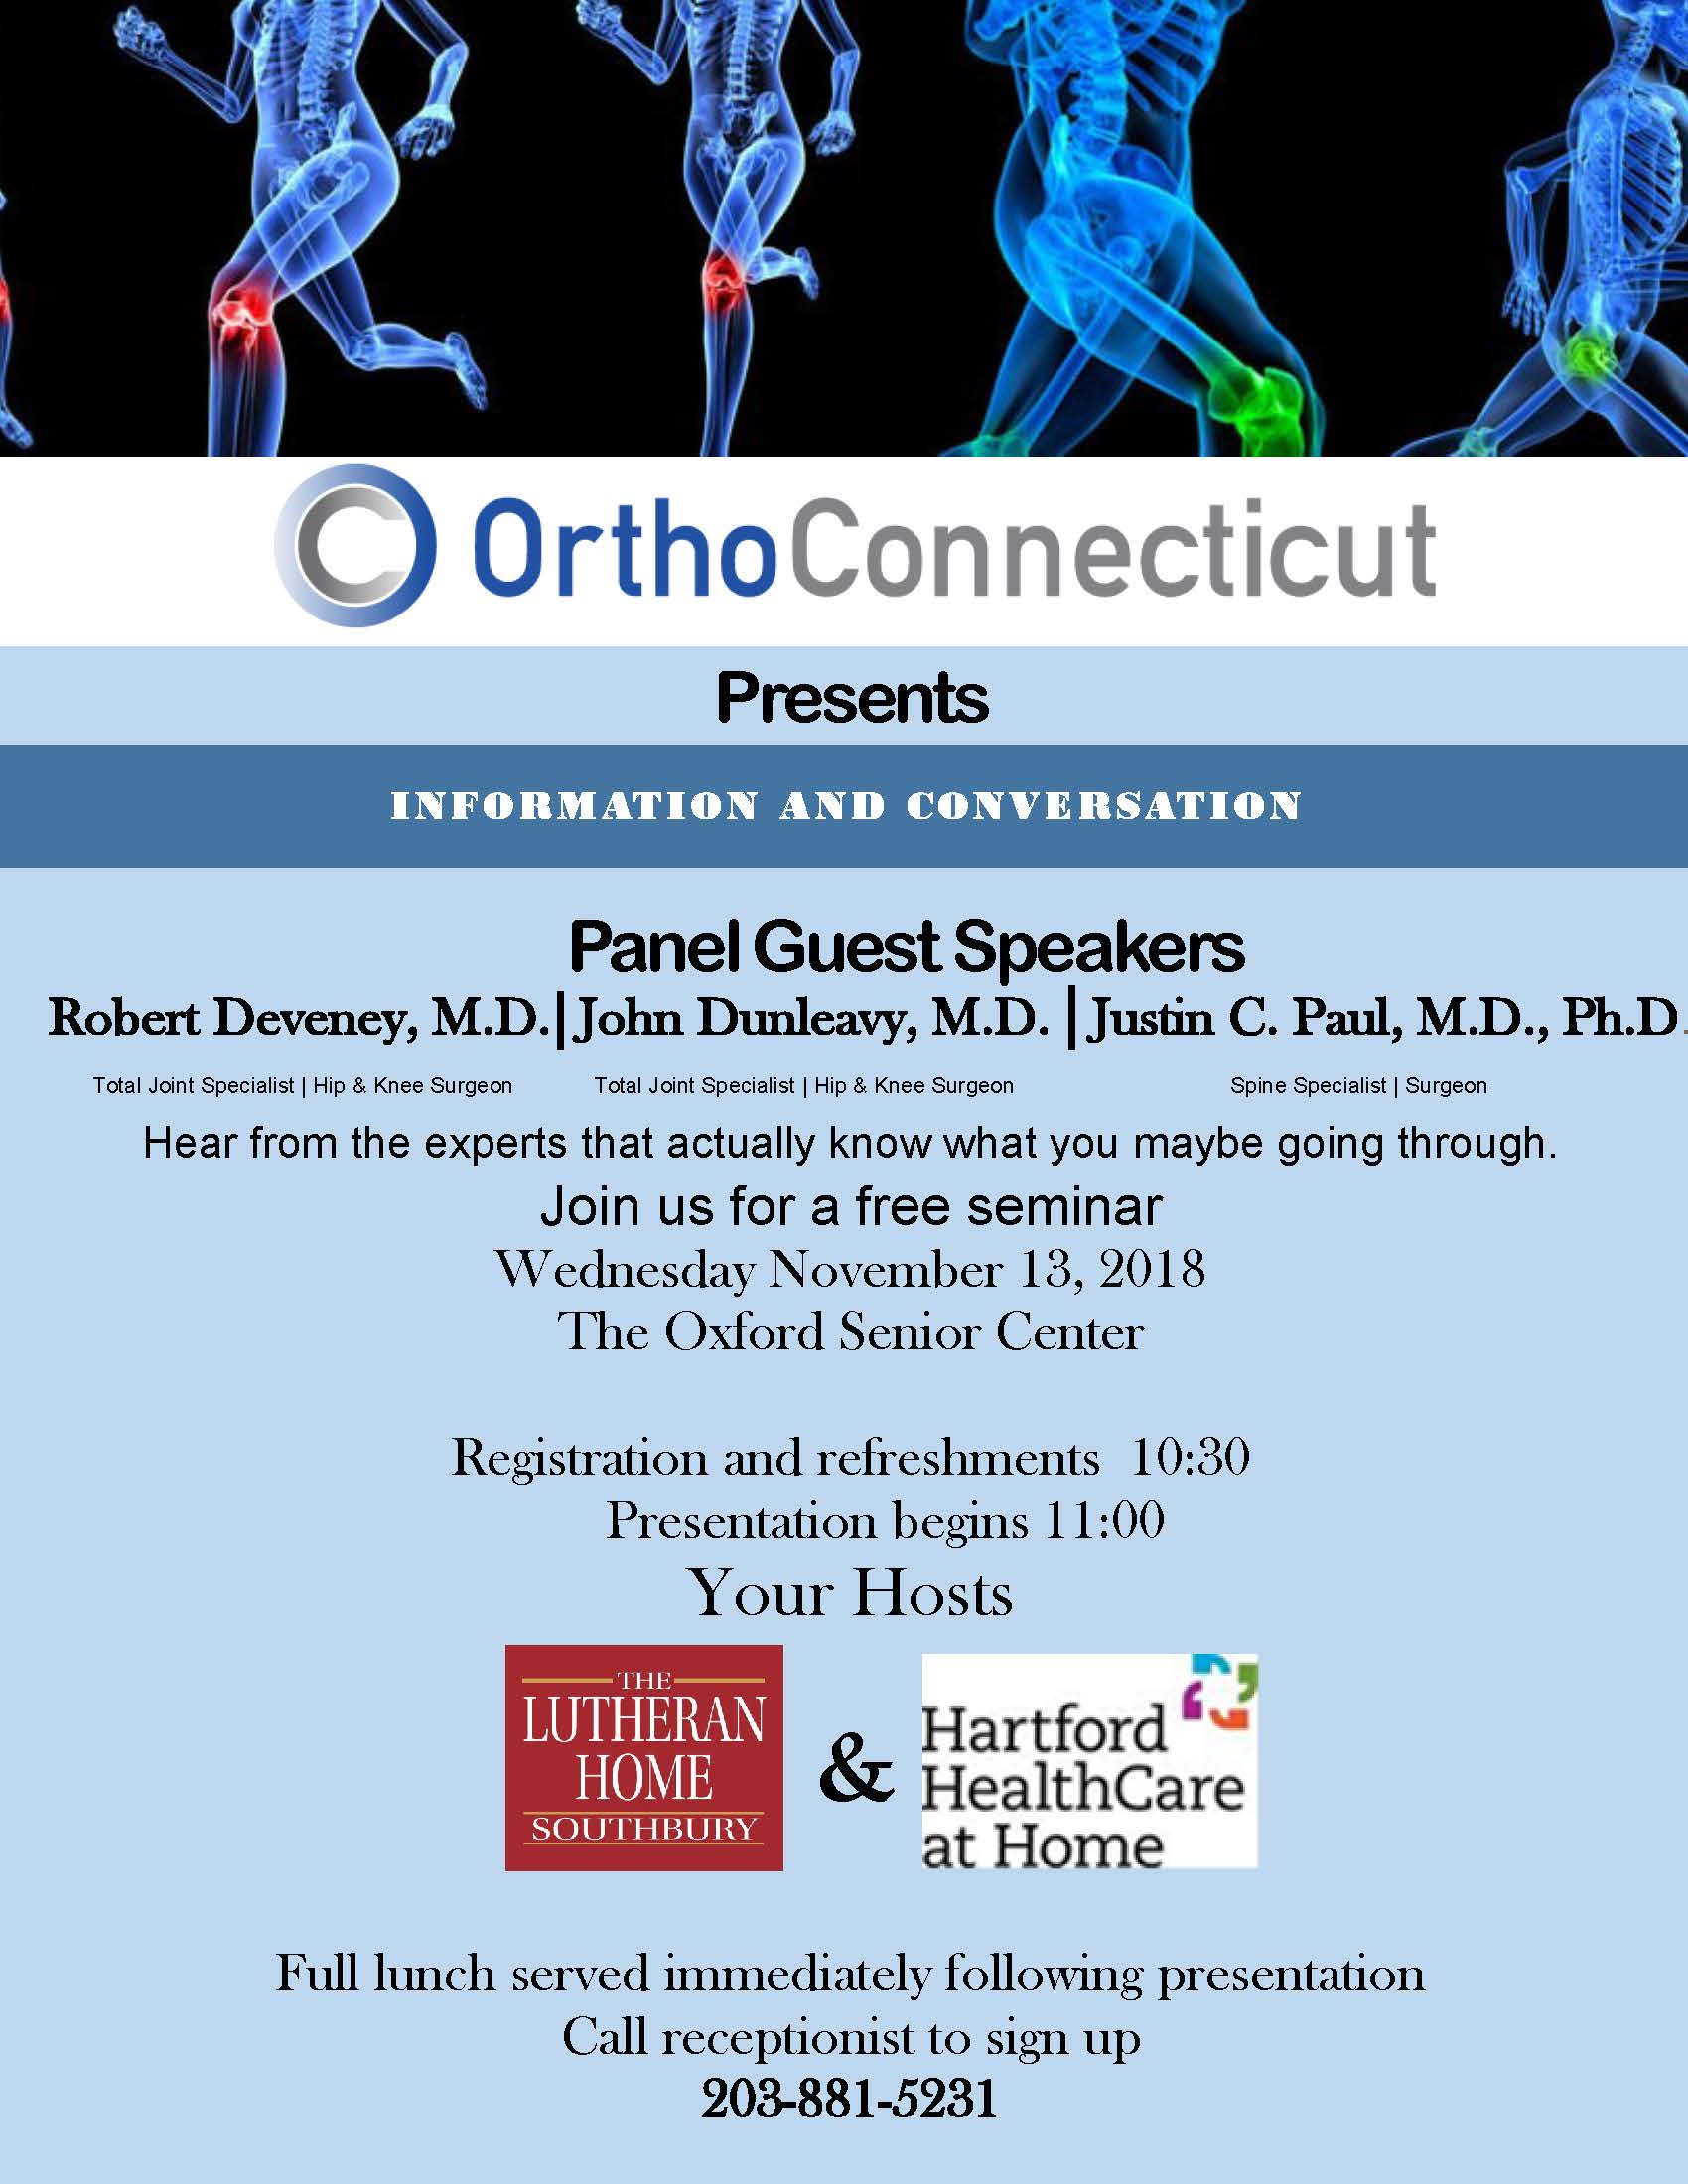 OrthoConnecticut Physician Panel flyer for Nov 13, 2018